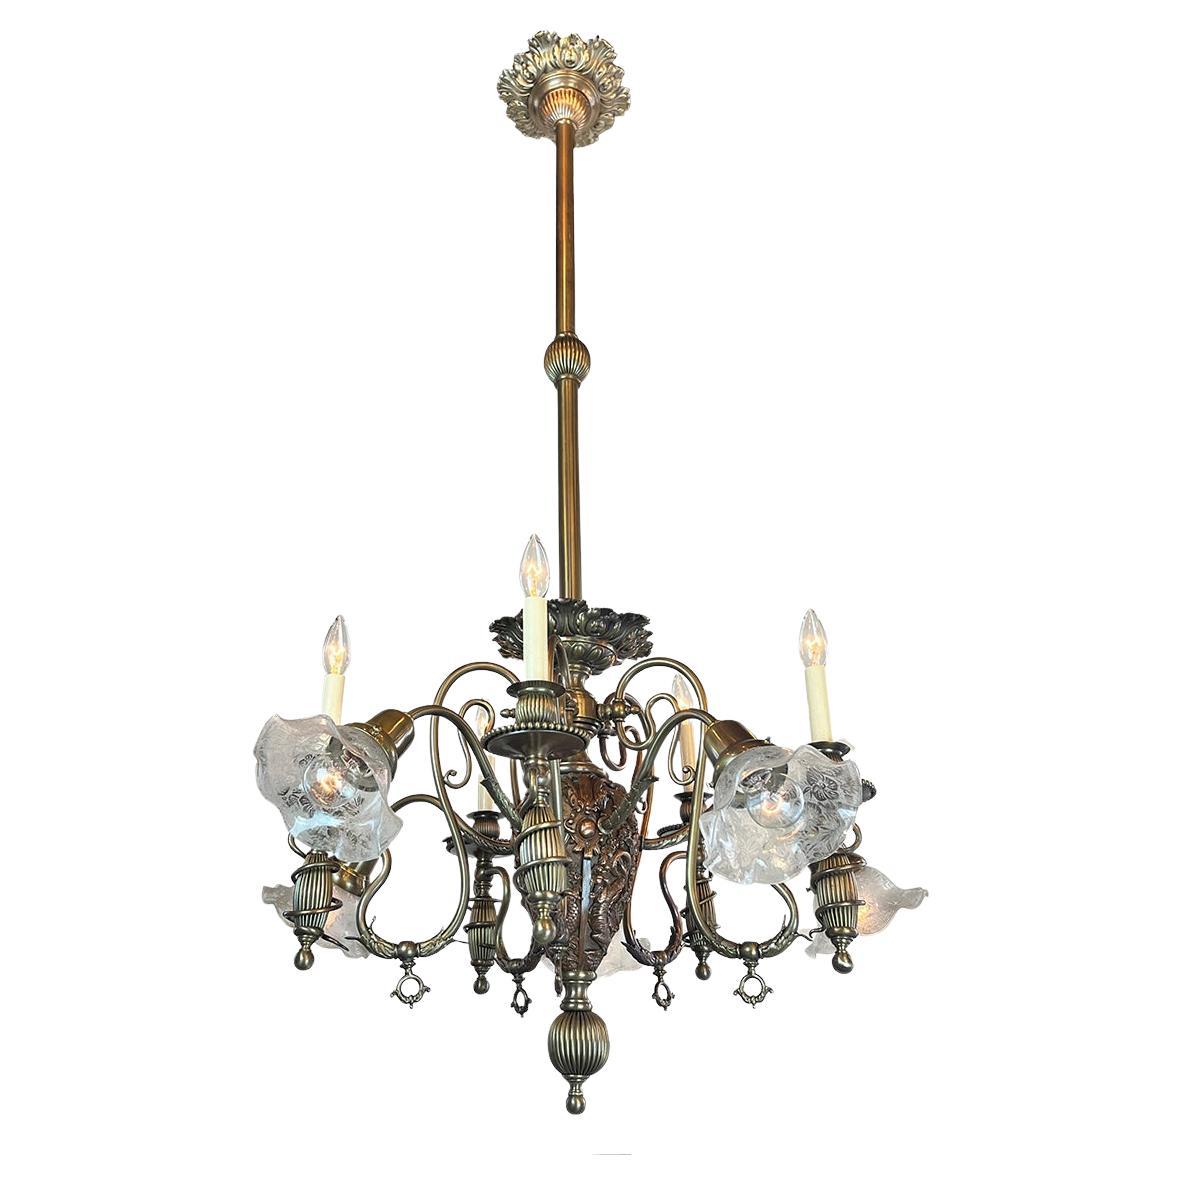 1887 Aesthetic Movement Combination Gas Electric Chandelier  For Sale